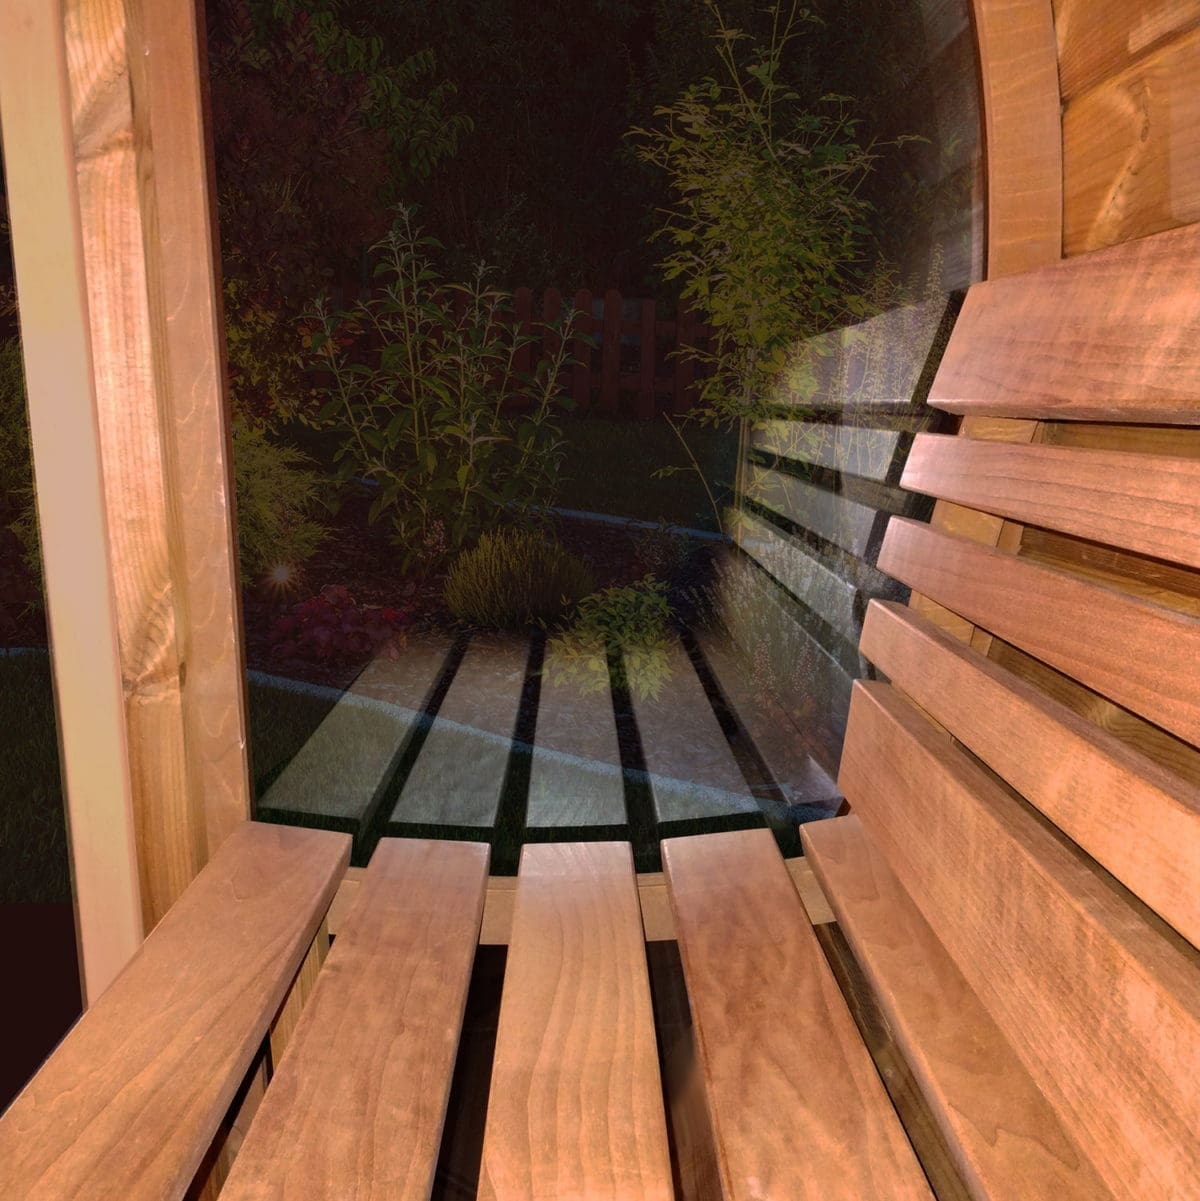 The image showcases a close-up view of the SaunaLife Ergo Barrel Sauna's seating area, particularly highlighting the ergonomic bench with a built-in backrest. The bench, made from grade A aspen, is designed to provide optimal comfort during the sauna experience.